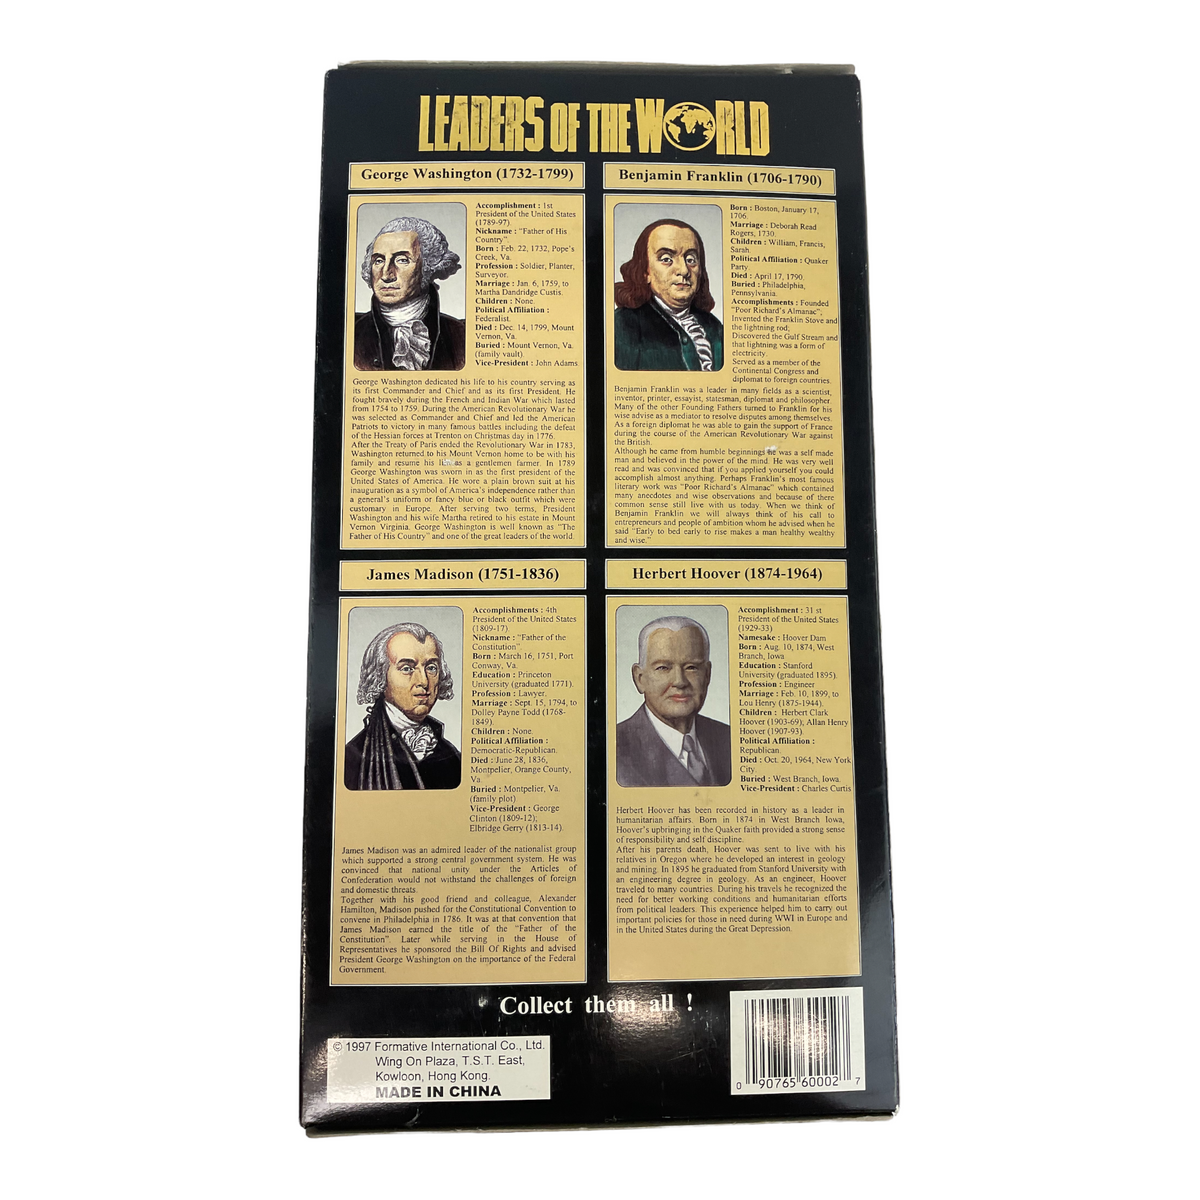 Leaders of the World Benjamin Franklin - Fully Poseable/Display Stand